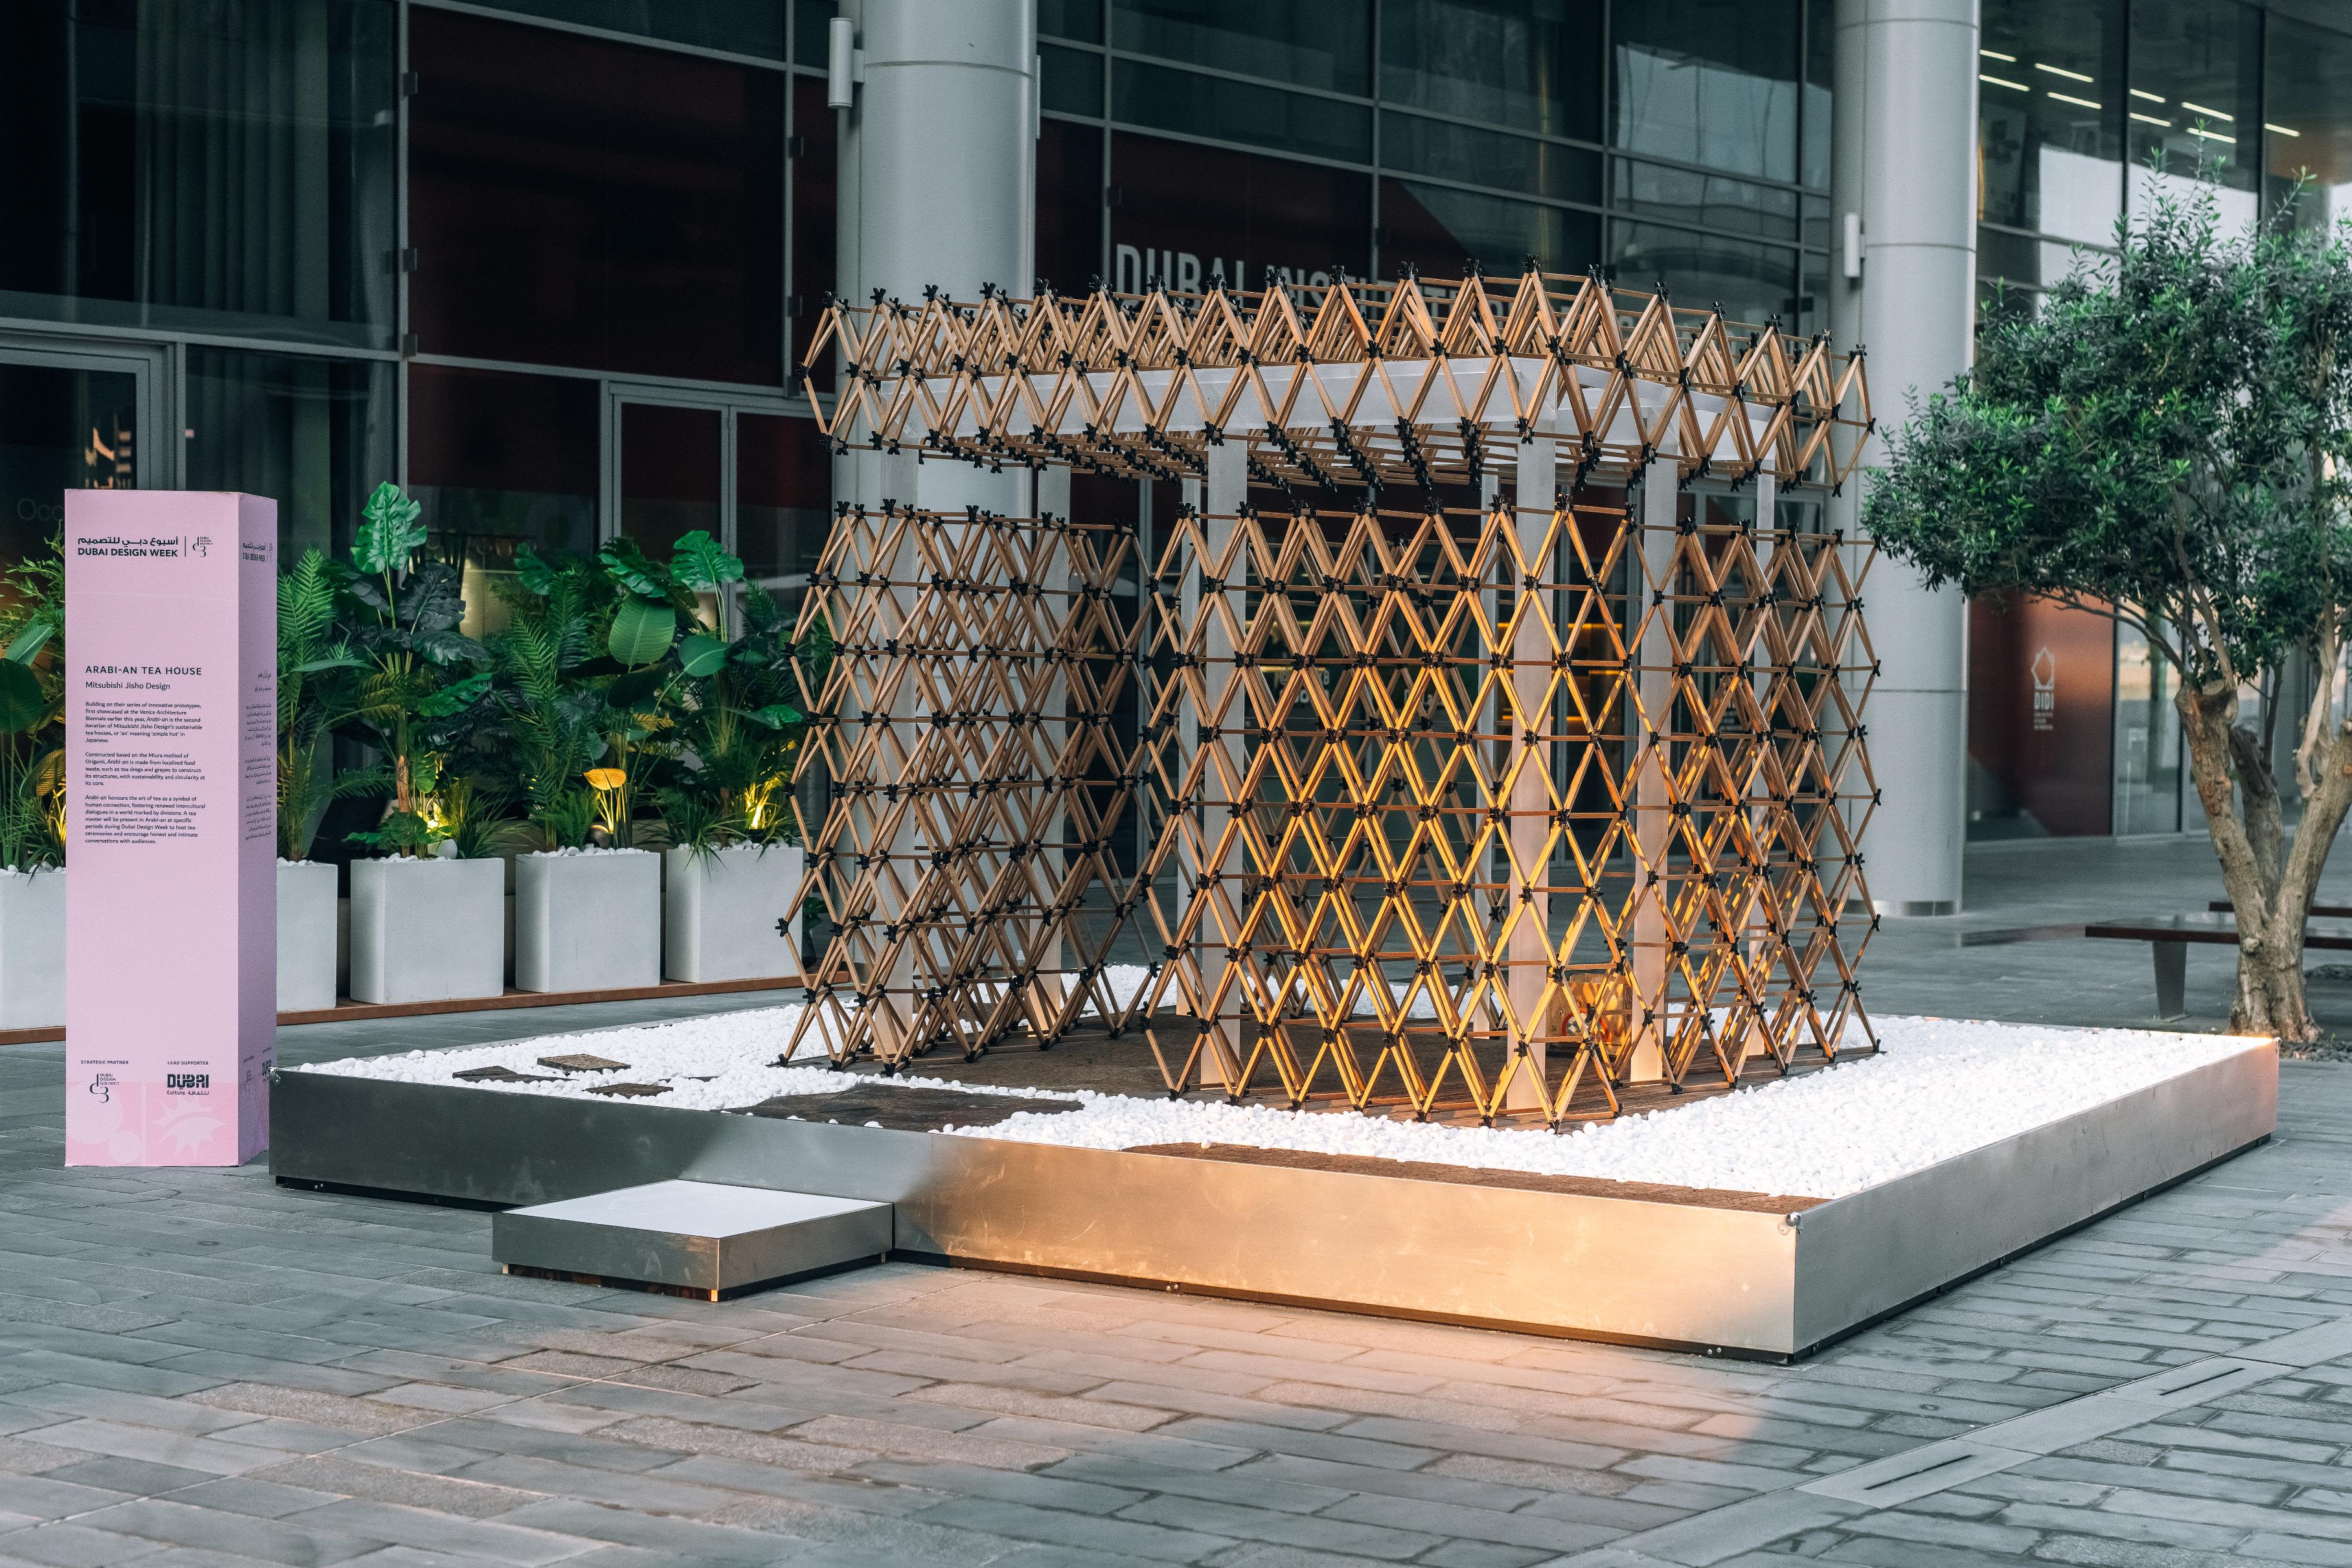 First unveiled at the 2023 Venice Architecture Biennale, this installation is the second iteration of Mitsubishi Jisho Design's 